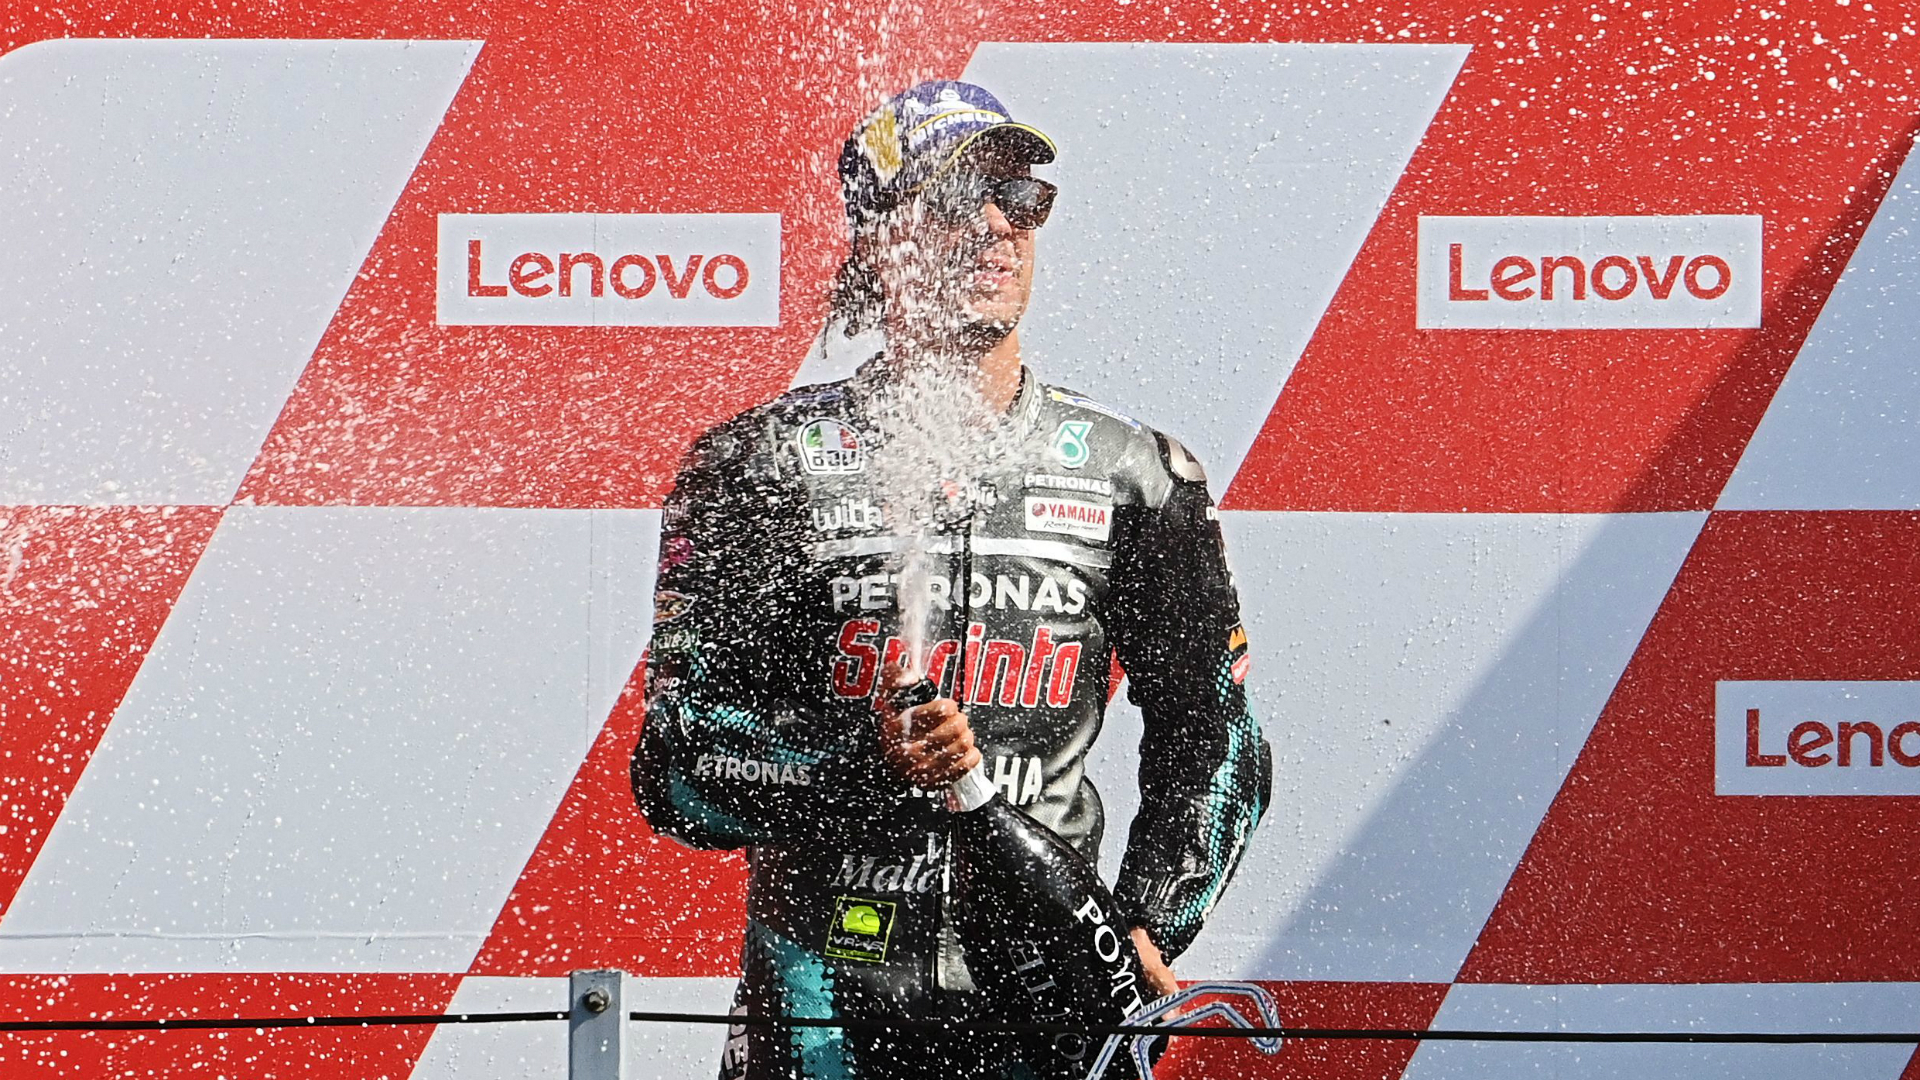 It was a day to remember at the San Marino Grand Prix for first-time MotoGP winner Franco Morbidelli.